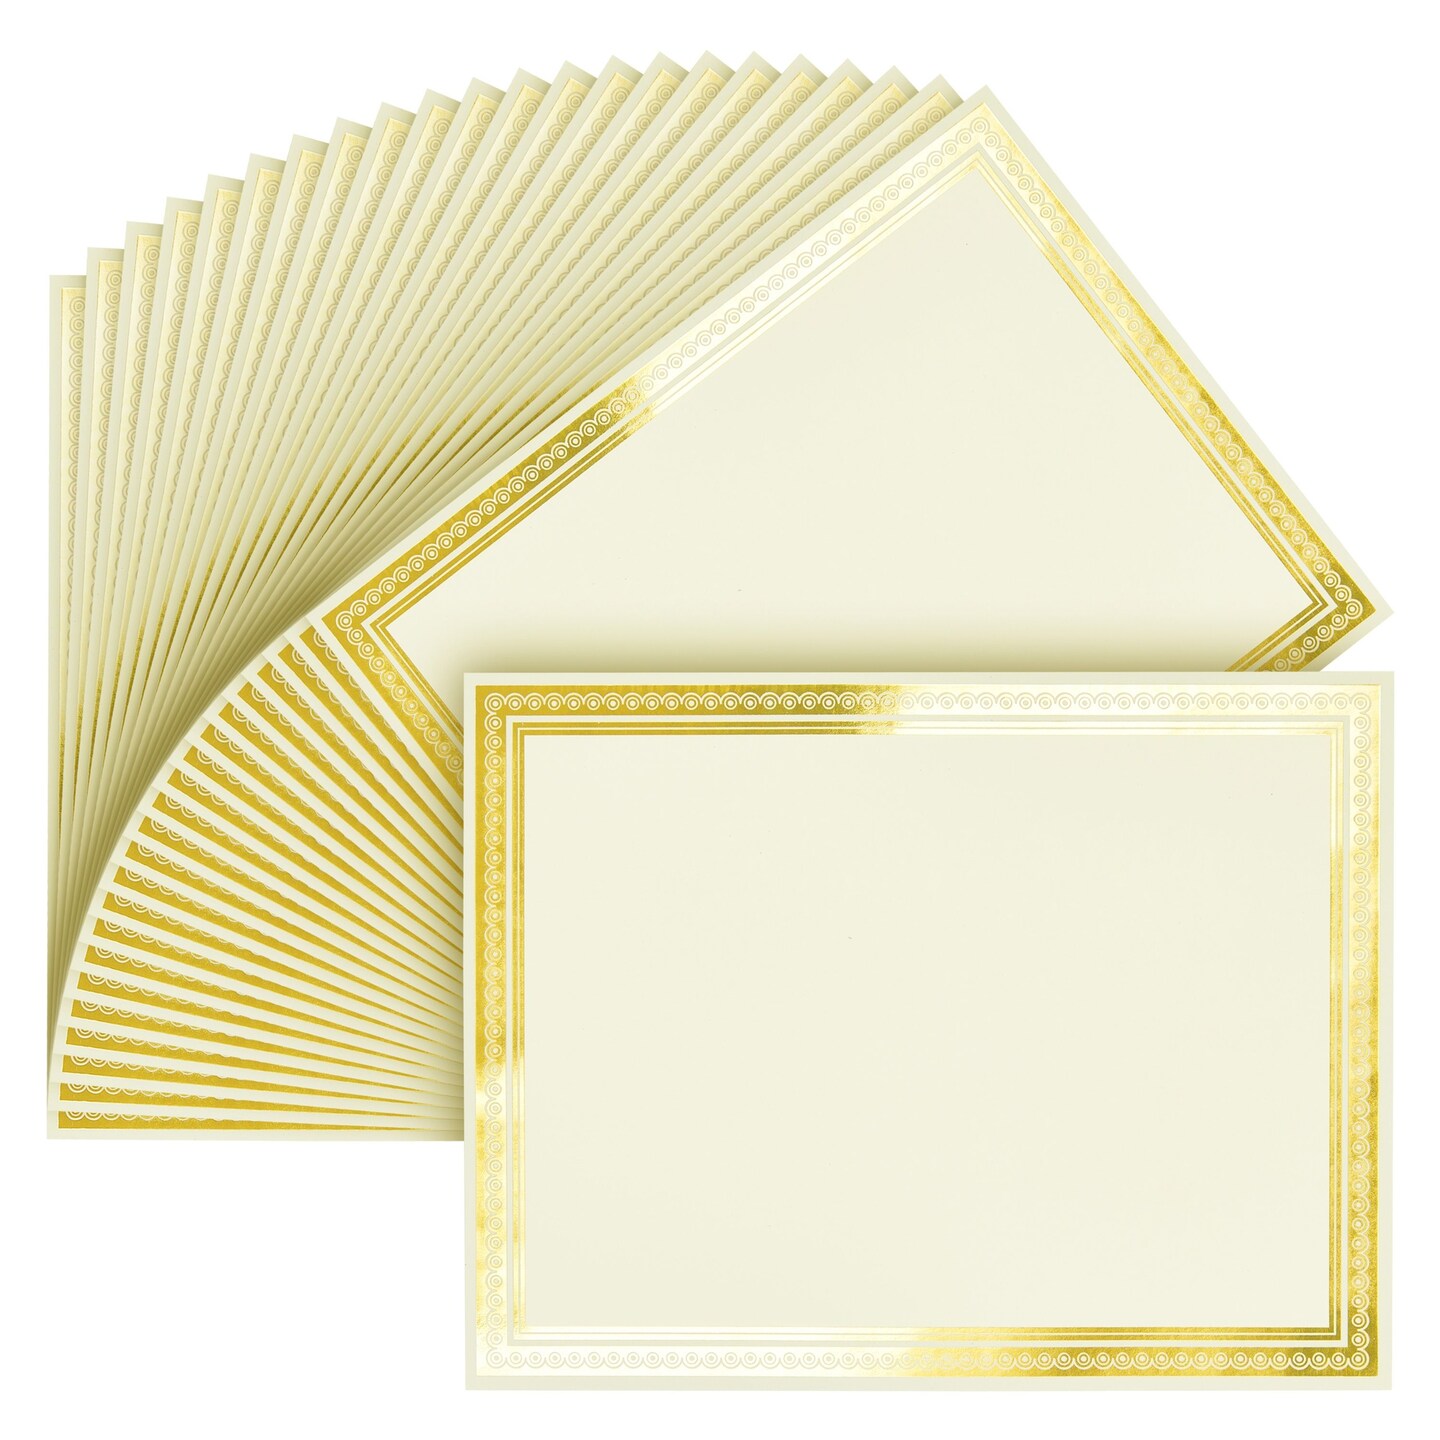 50 Sheets Gold Foil Award Certificate Paper 8.5 x 11 for Printing - Blank Cardstock for Graduation, Diploma and Achievement (Ivory)